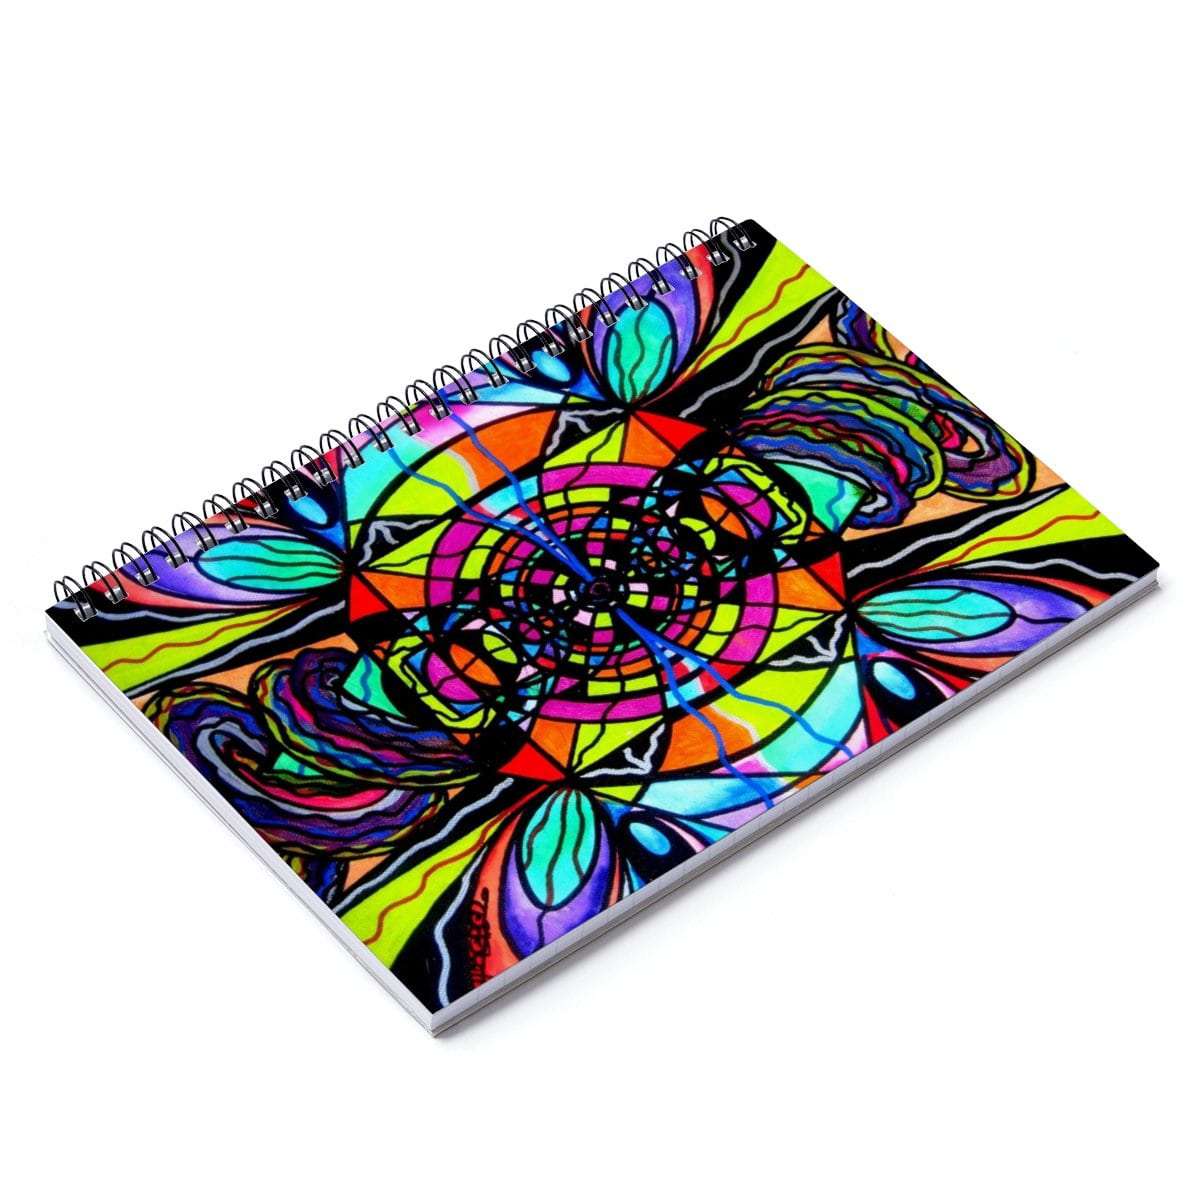 get-the-official-planetary-vortex-spiral-notebook-hot-on-sale_1.jpg